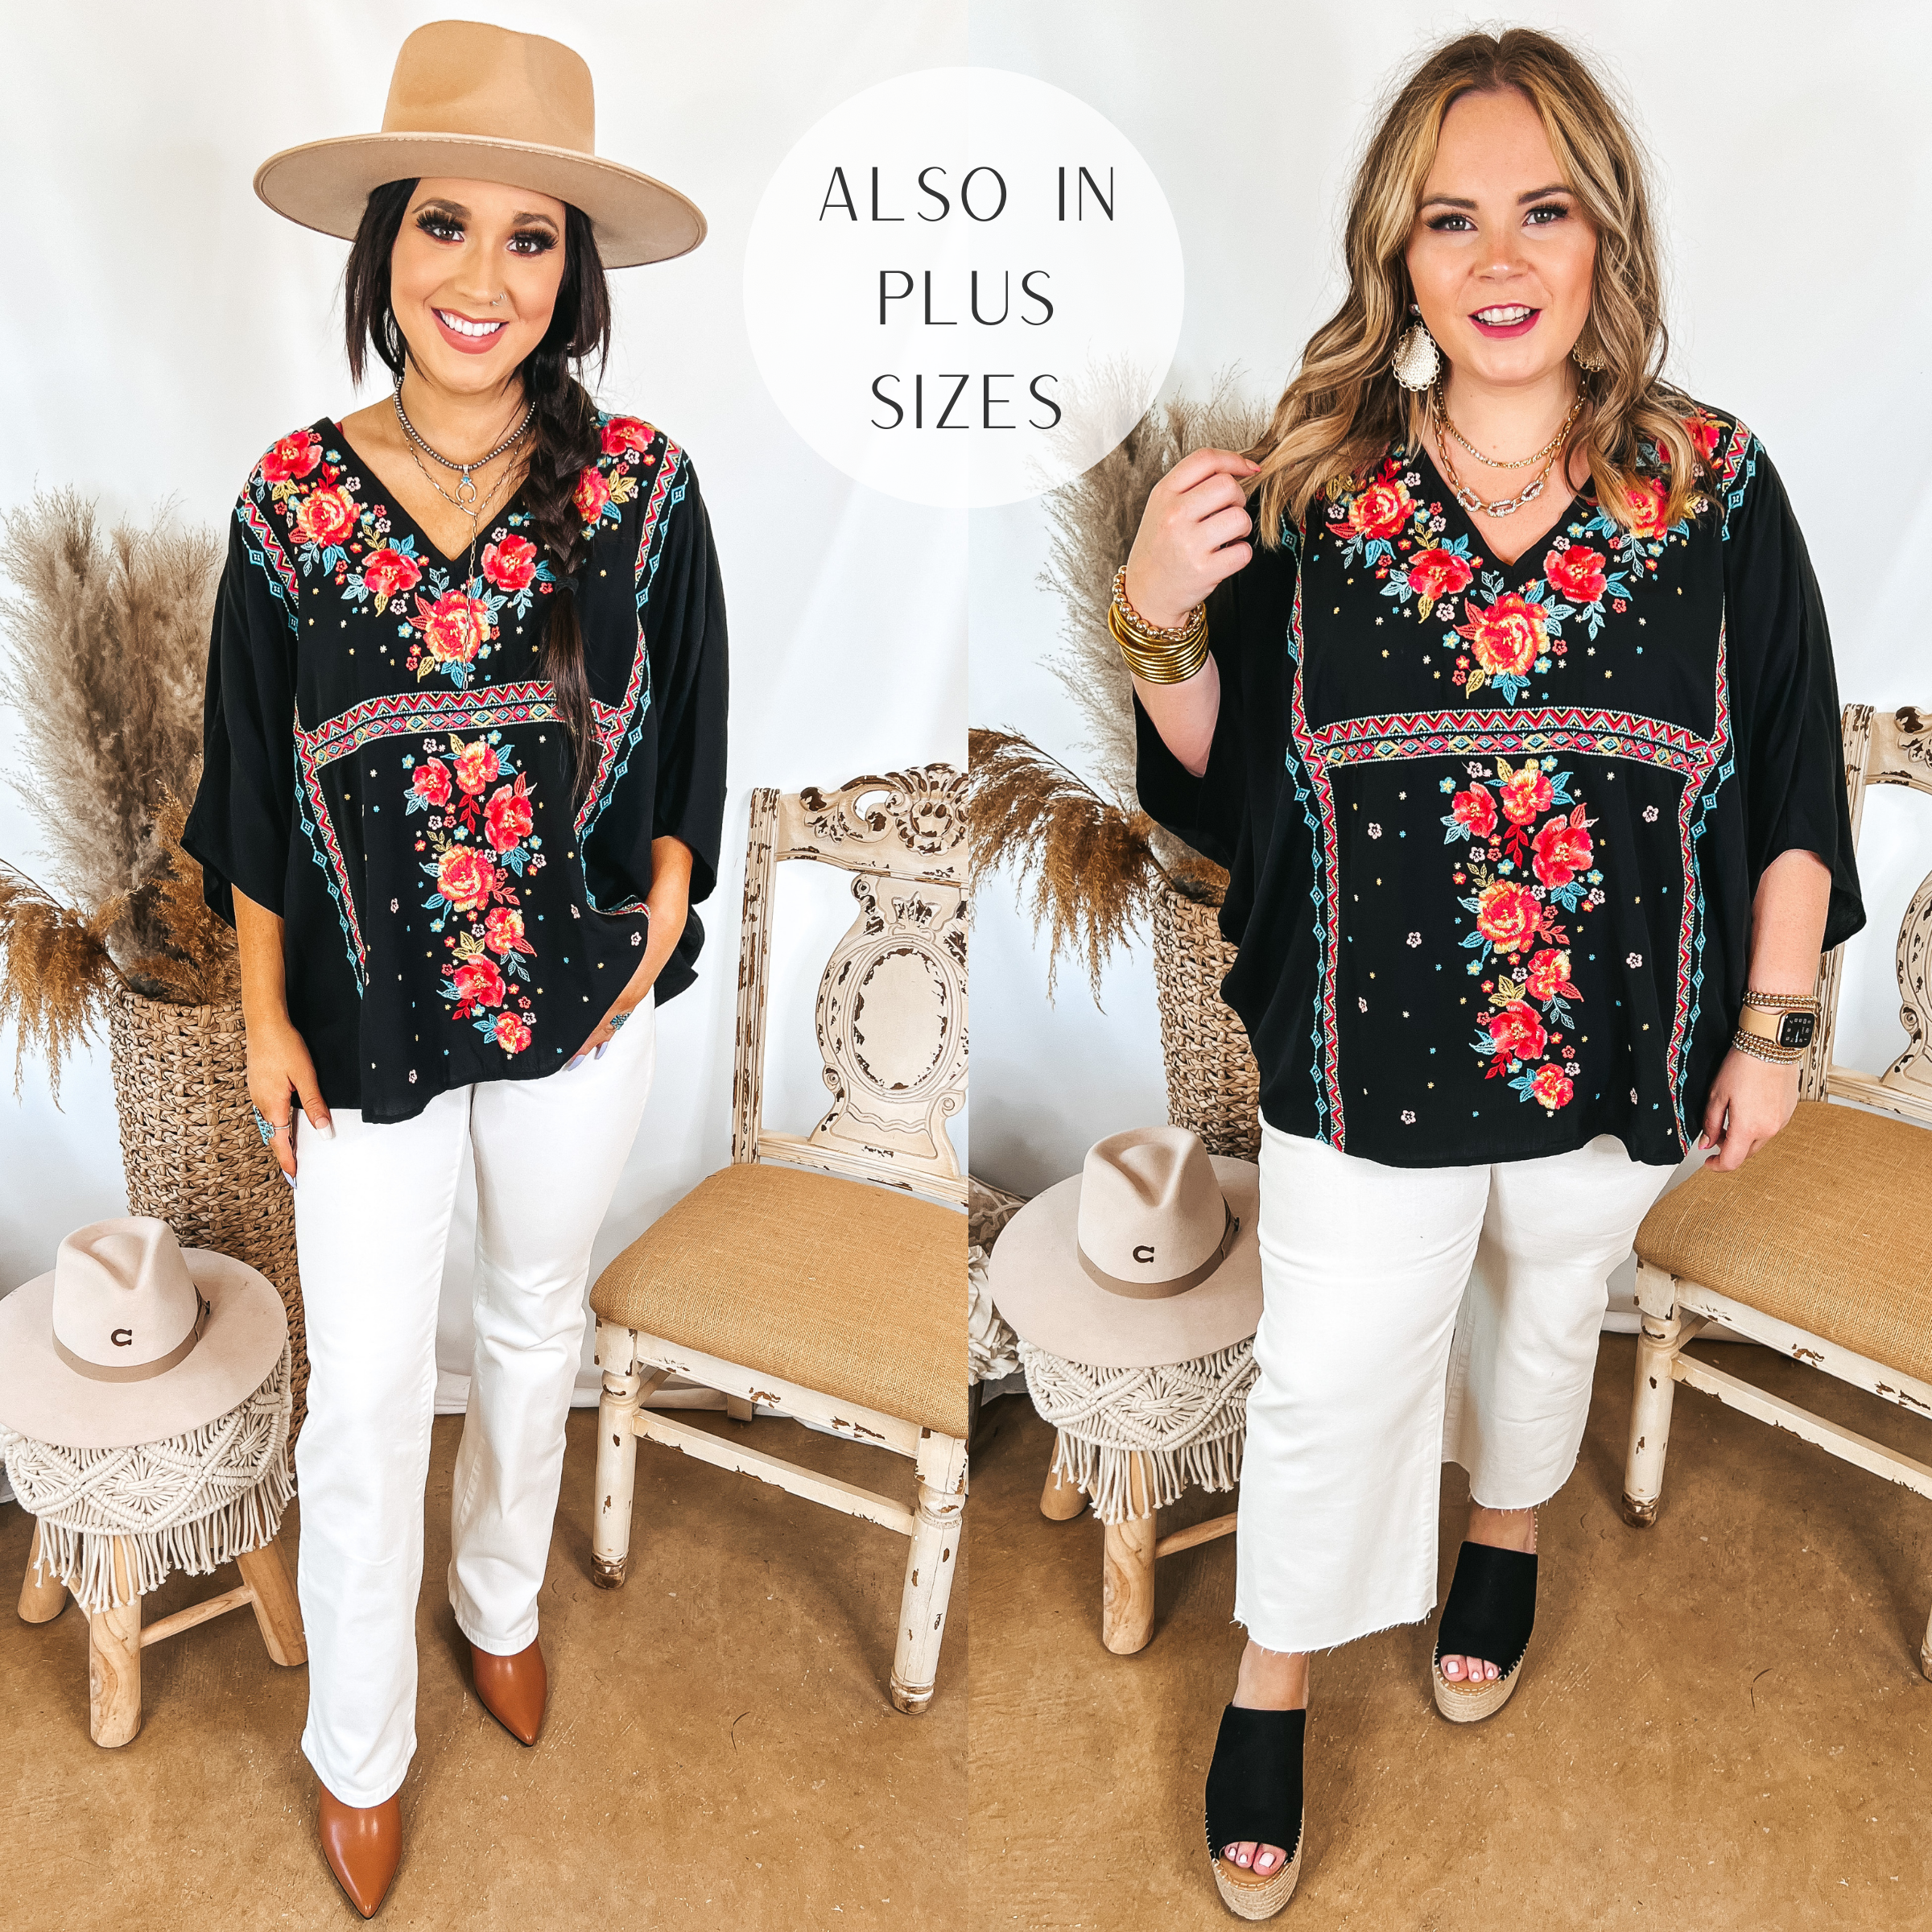 Models are wearing a black poncho top that has colorful embroidery all over. SIze small model has it paired with white bootcut jeans, tan boots, and a tan hat. Size large model has it paired with cropped white jeans, black wedges, and gold jewelry.